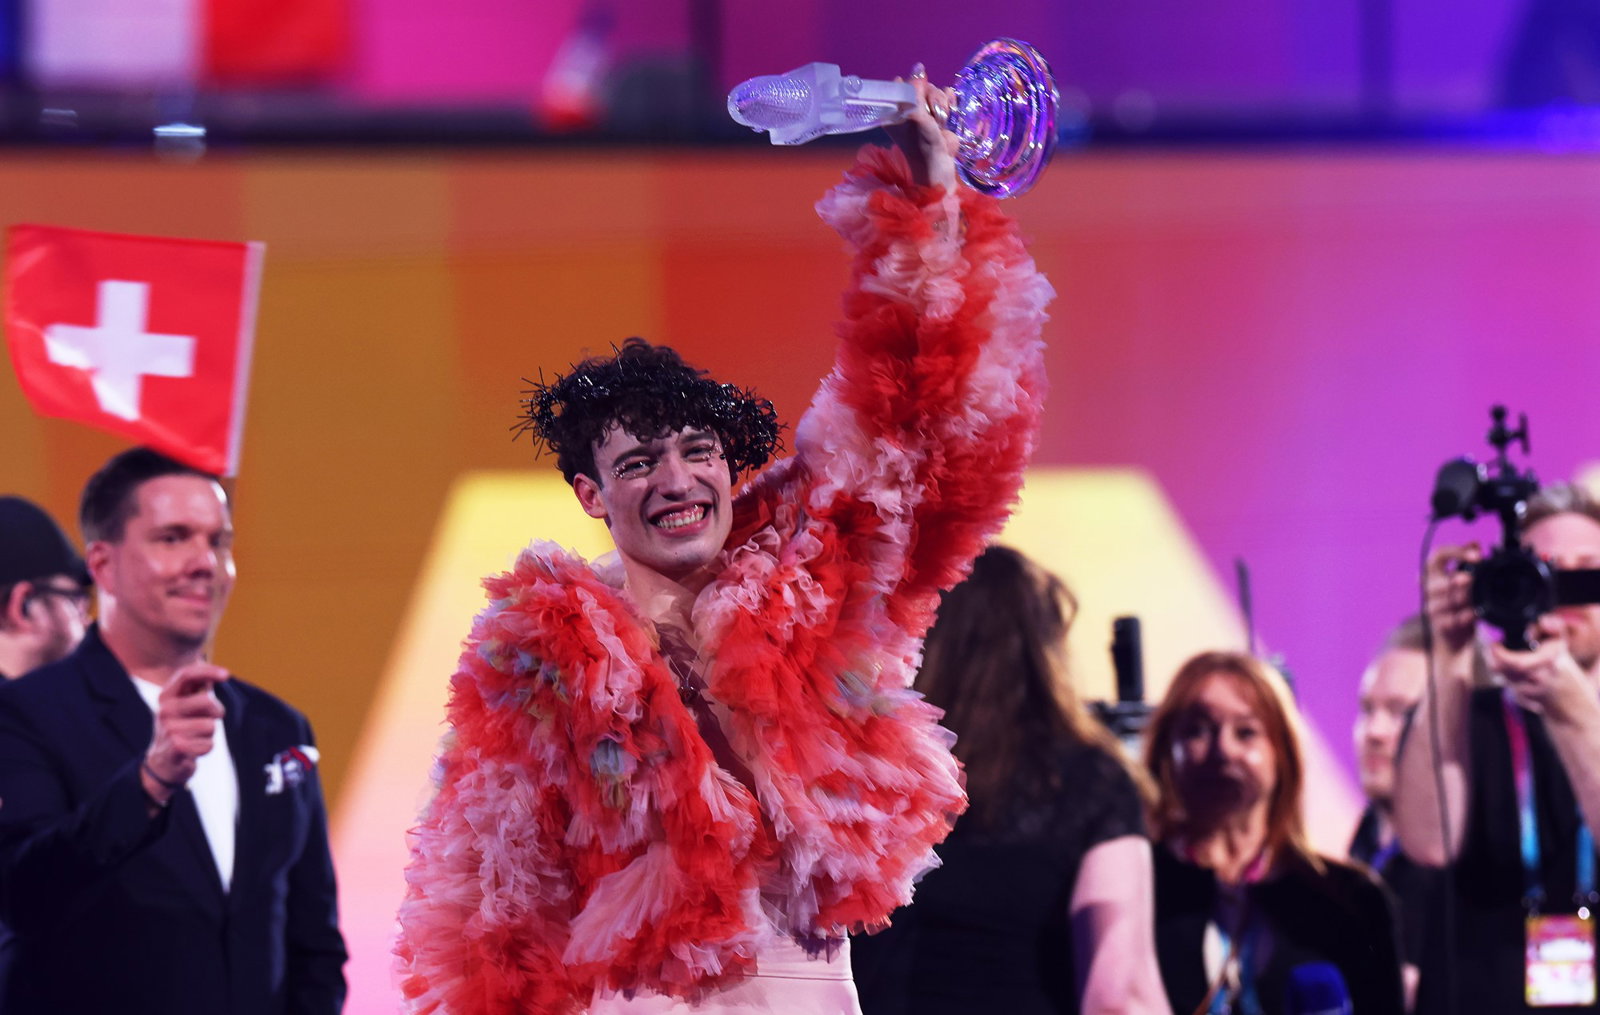 Artist Nemo in red with the eurovision trophy in his hand up on stage